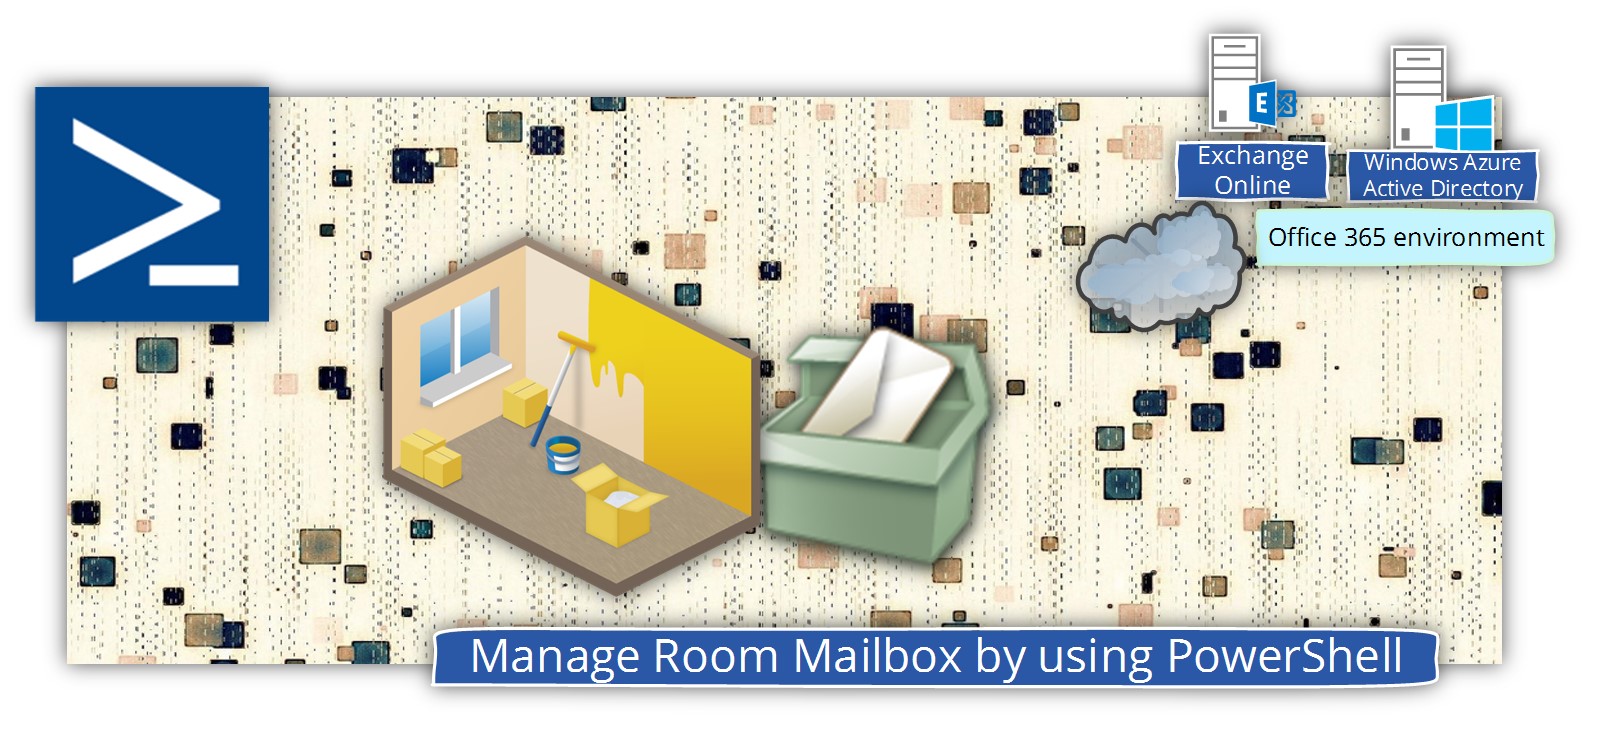 Manage Room Mailbox by using PowerShell Office 365